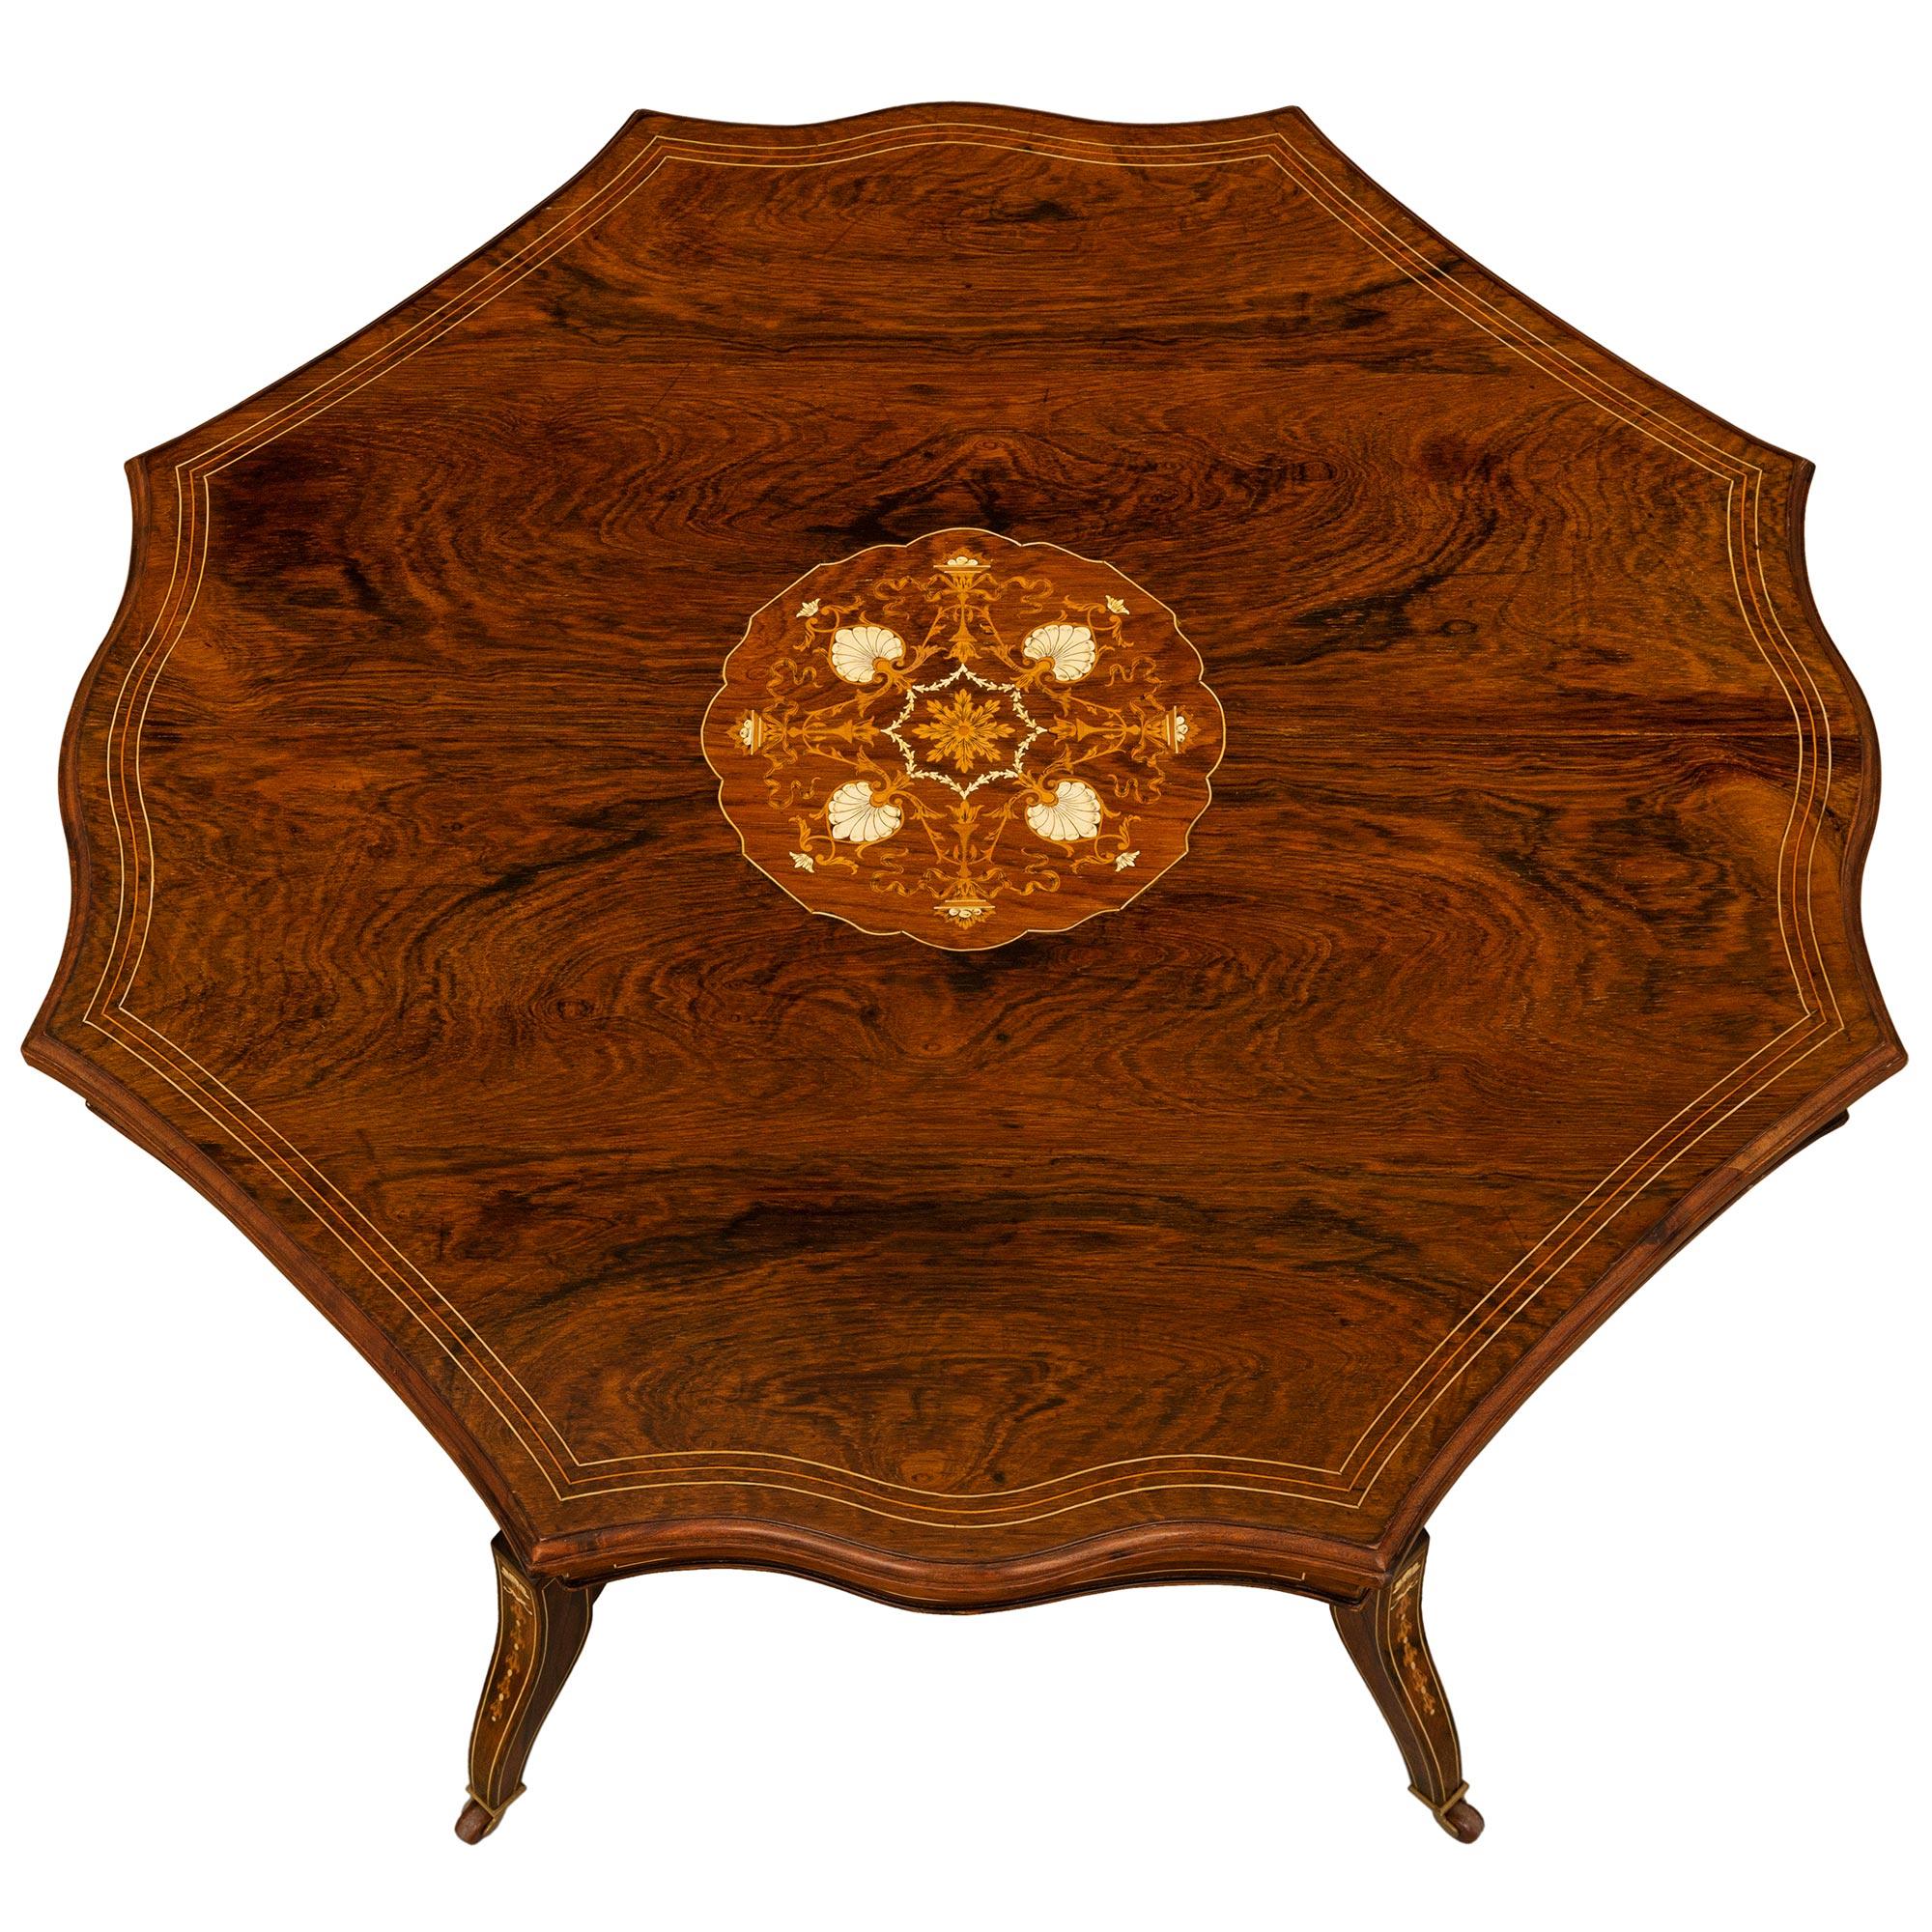 A striking and most unique English 19th century Regency st. rosewood, bone and inlaid center/side table. The table is raised by elegant lightly curved feet with lovely foliate inlaid designs. Each foot is attached by a most decorative stretcher with